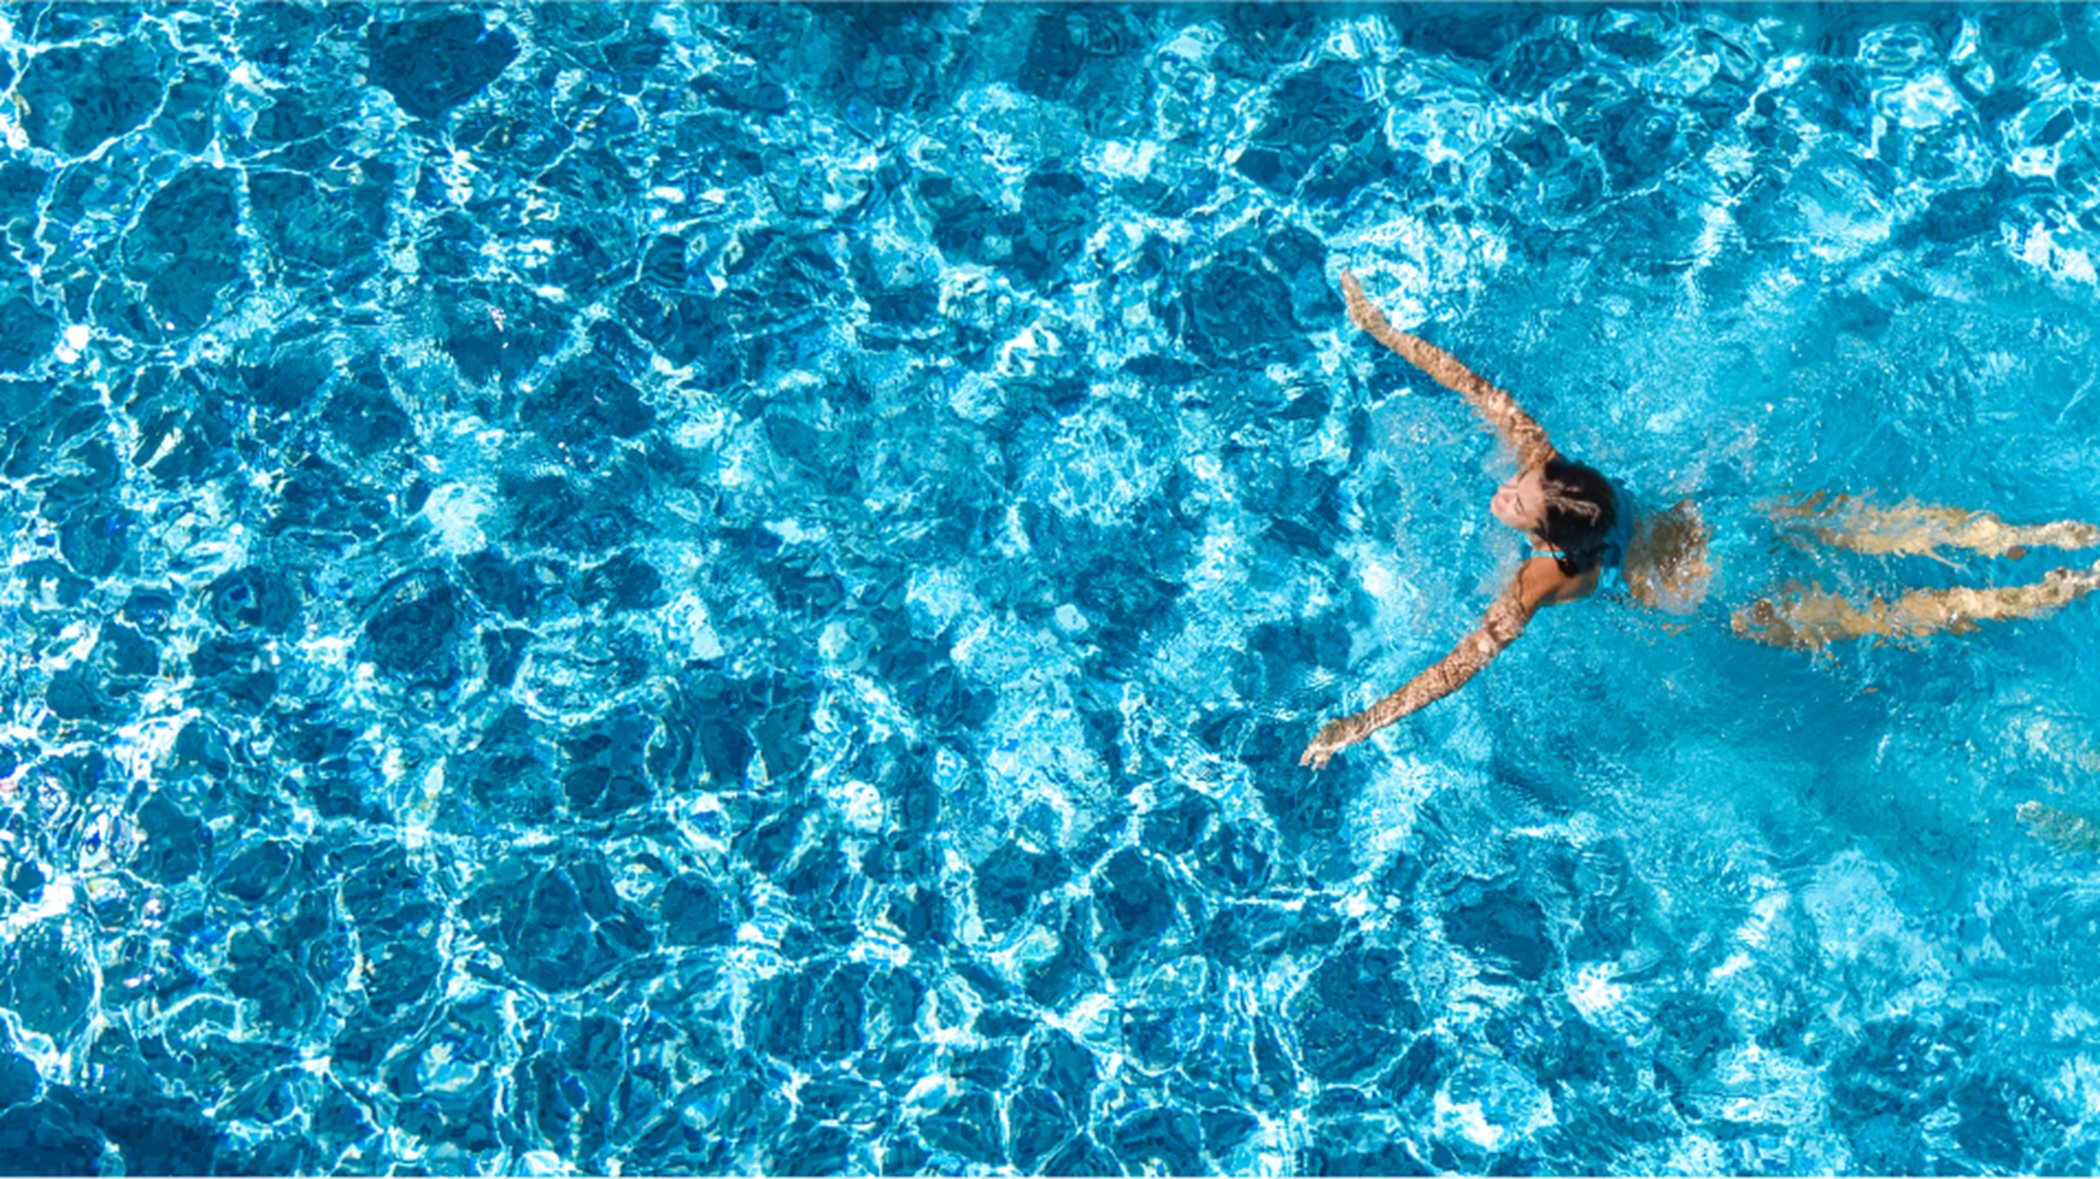 Aerial view of a woman swimming in a pool